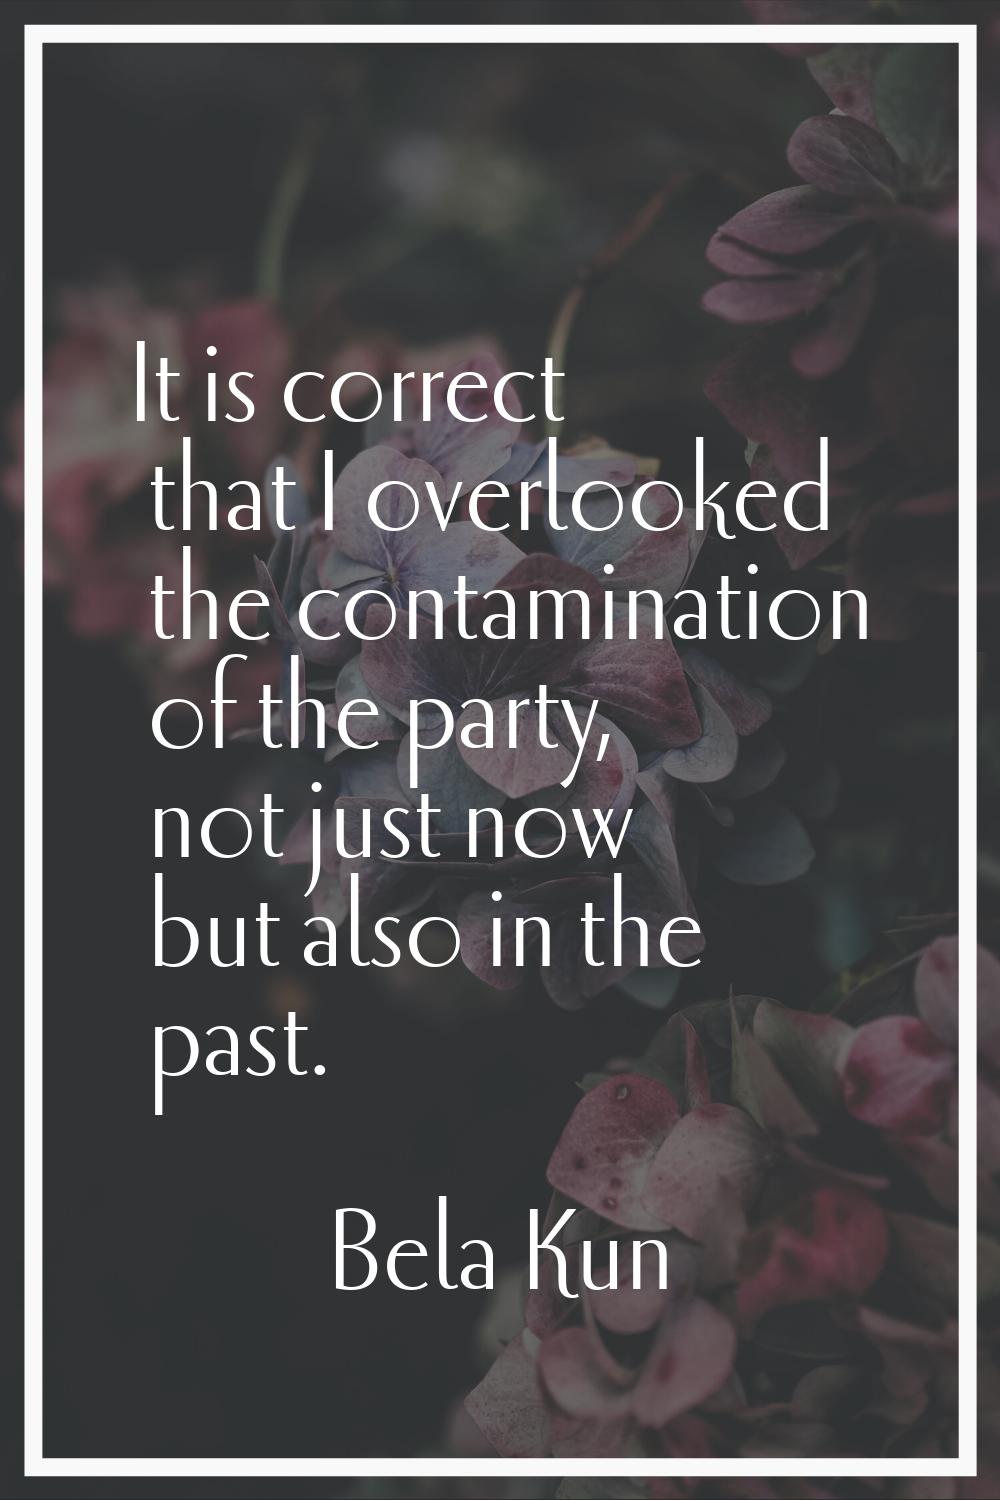 It is correct that I overlooked the contamination of the party, not just now but also in the past.